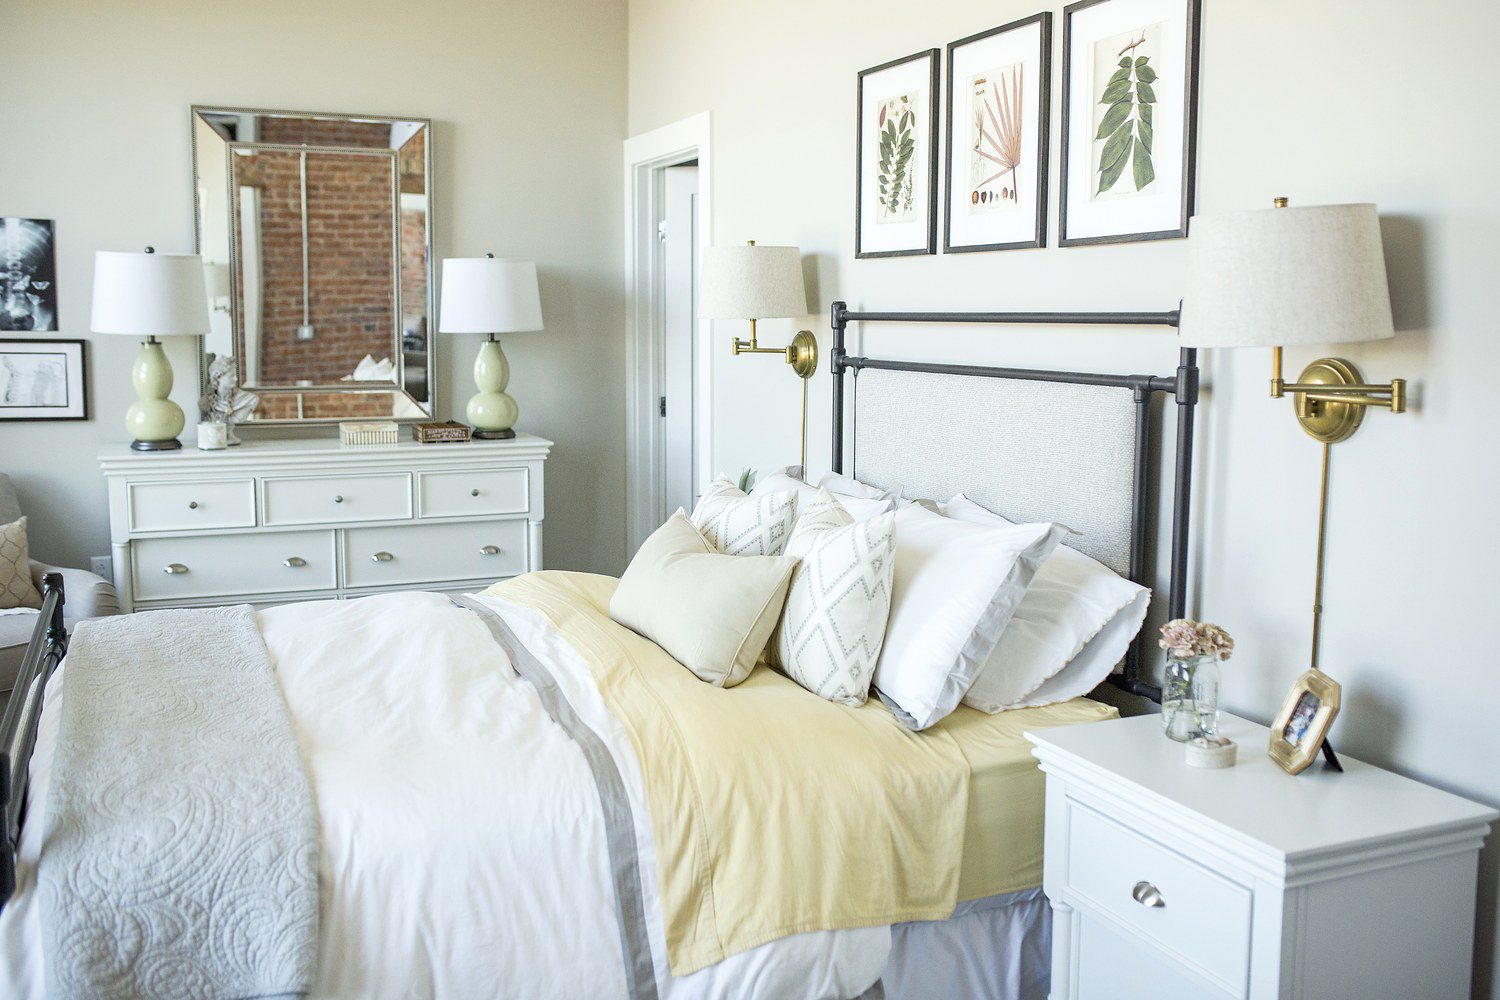 A bedroom with white walls and a yellow comforter.